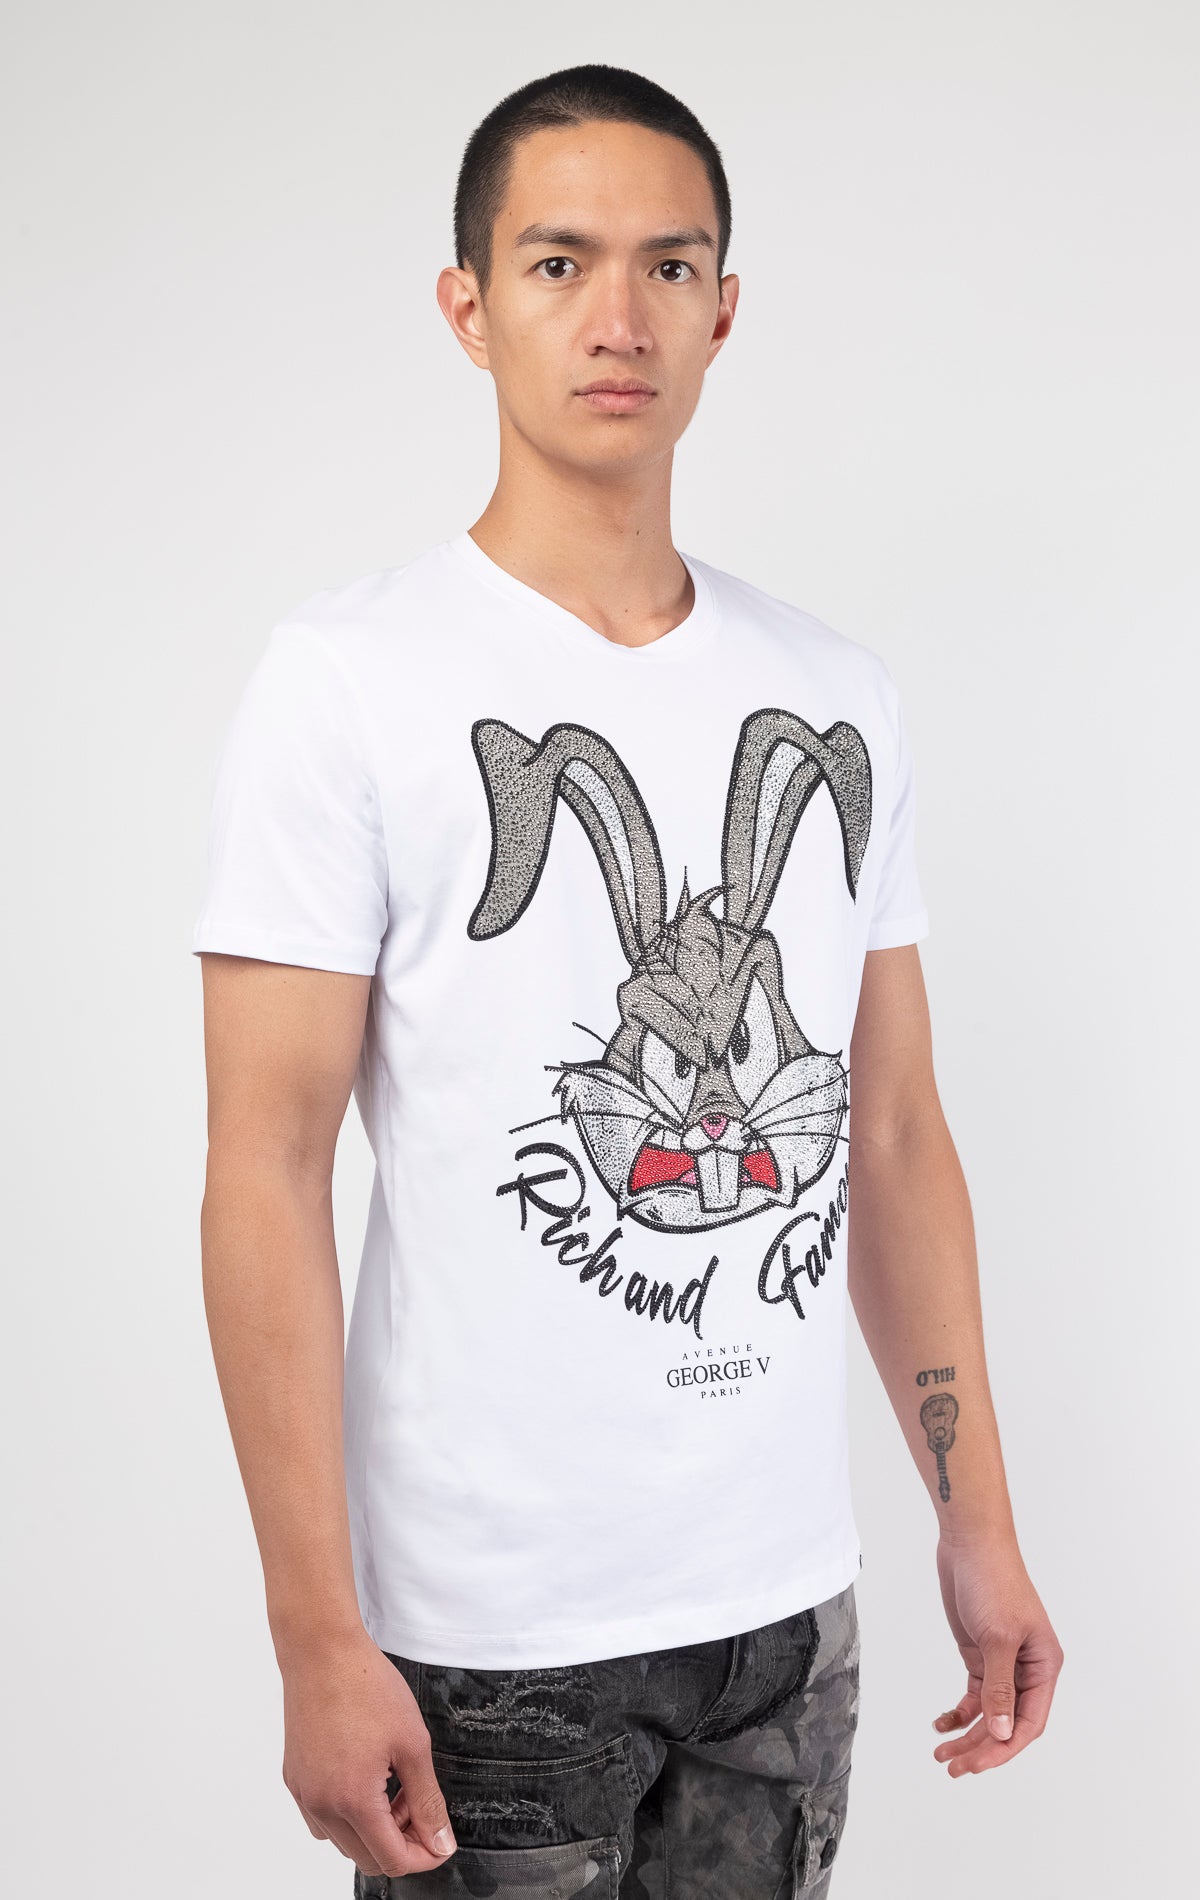 WHITE T-shirt featuring an angry rabbit pattern adorned with rhinestones.